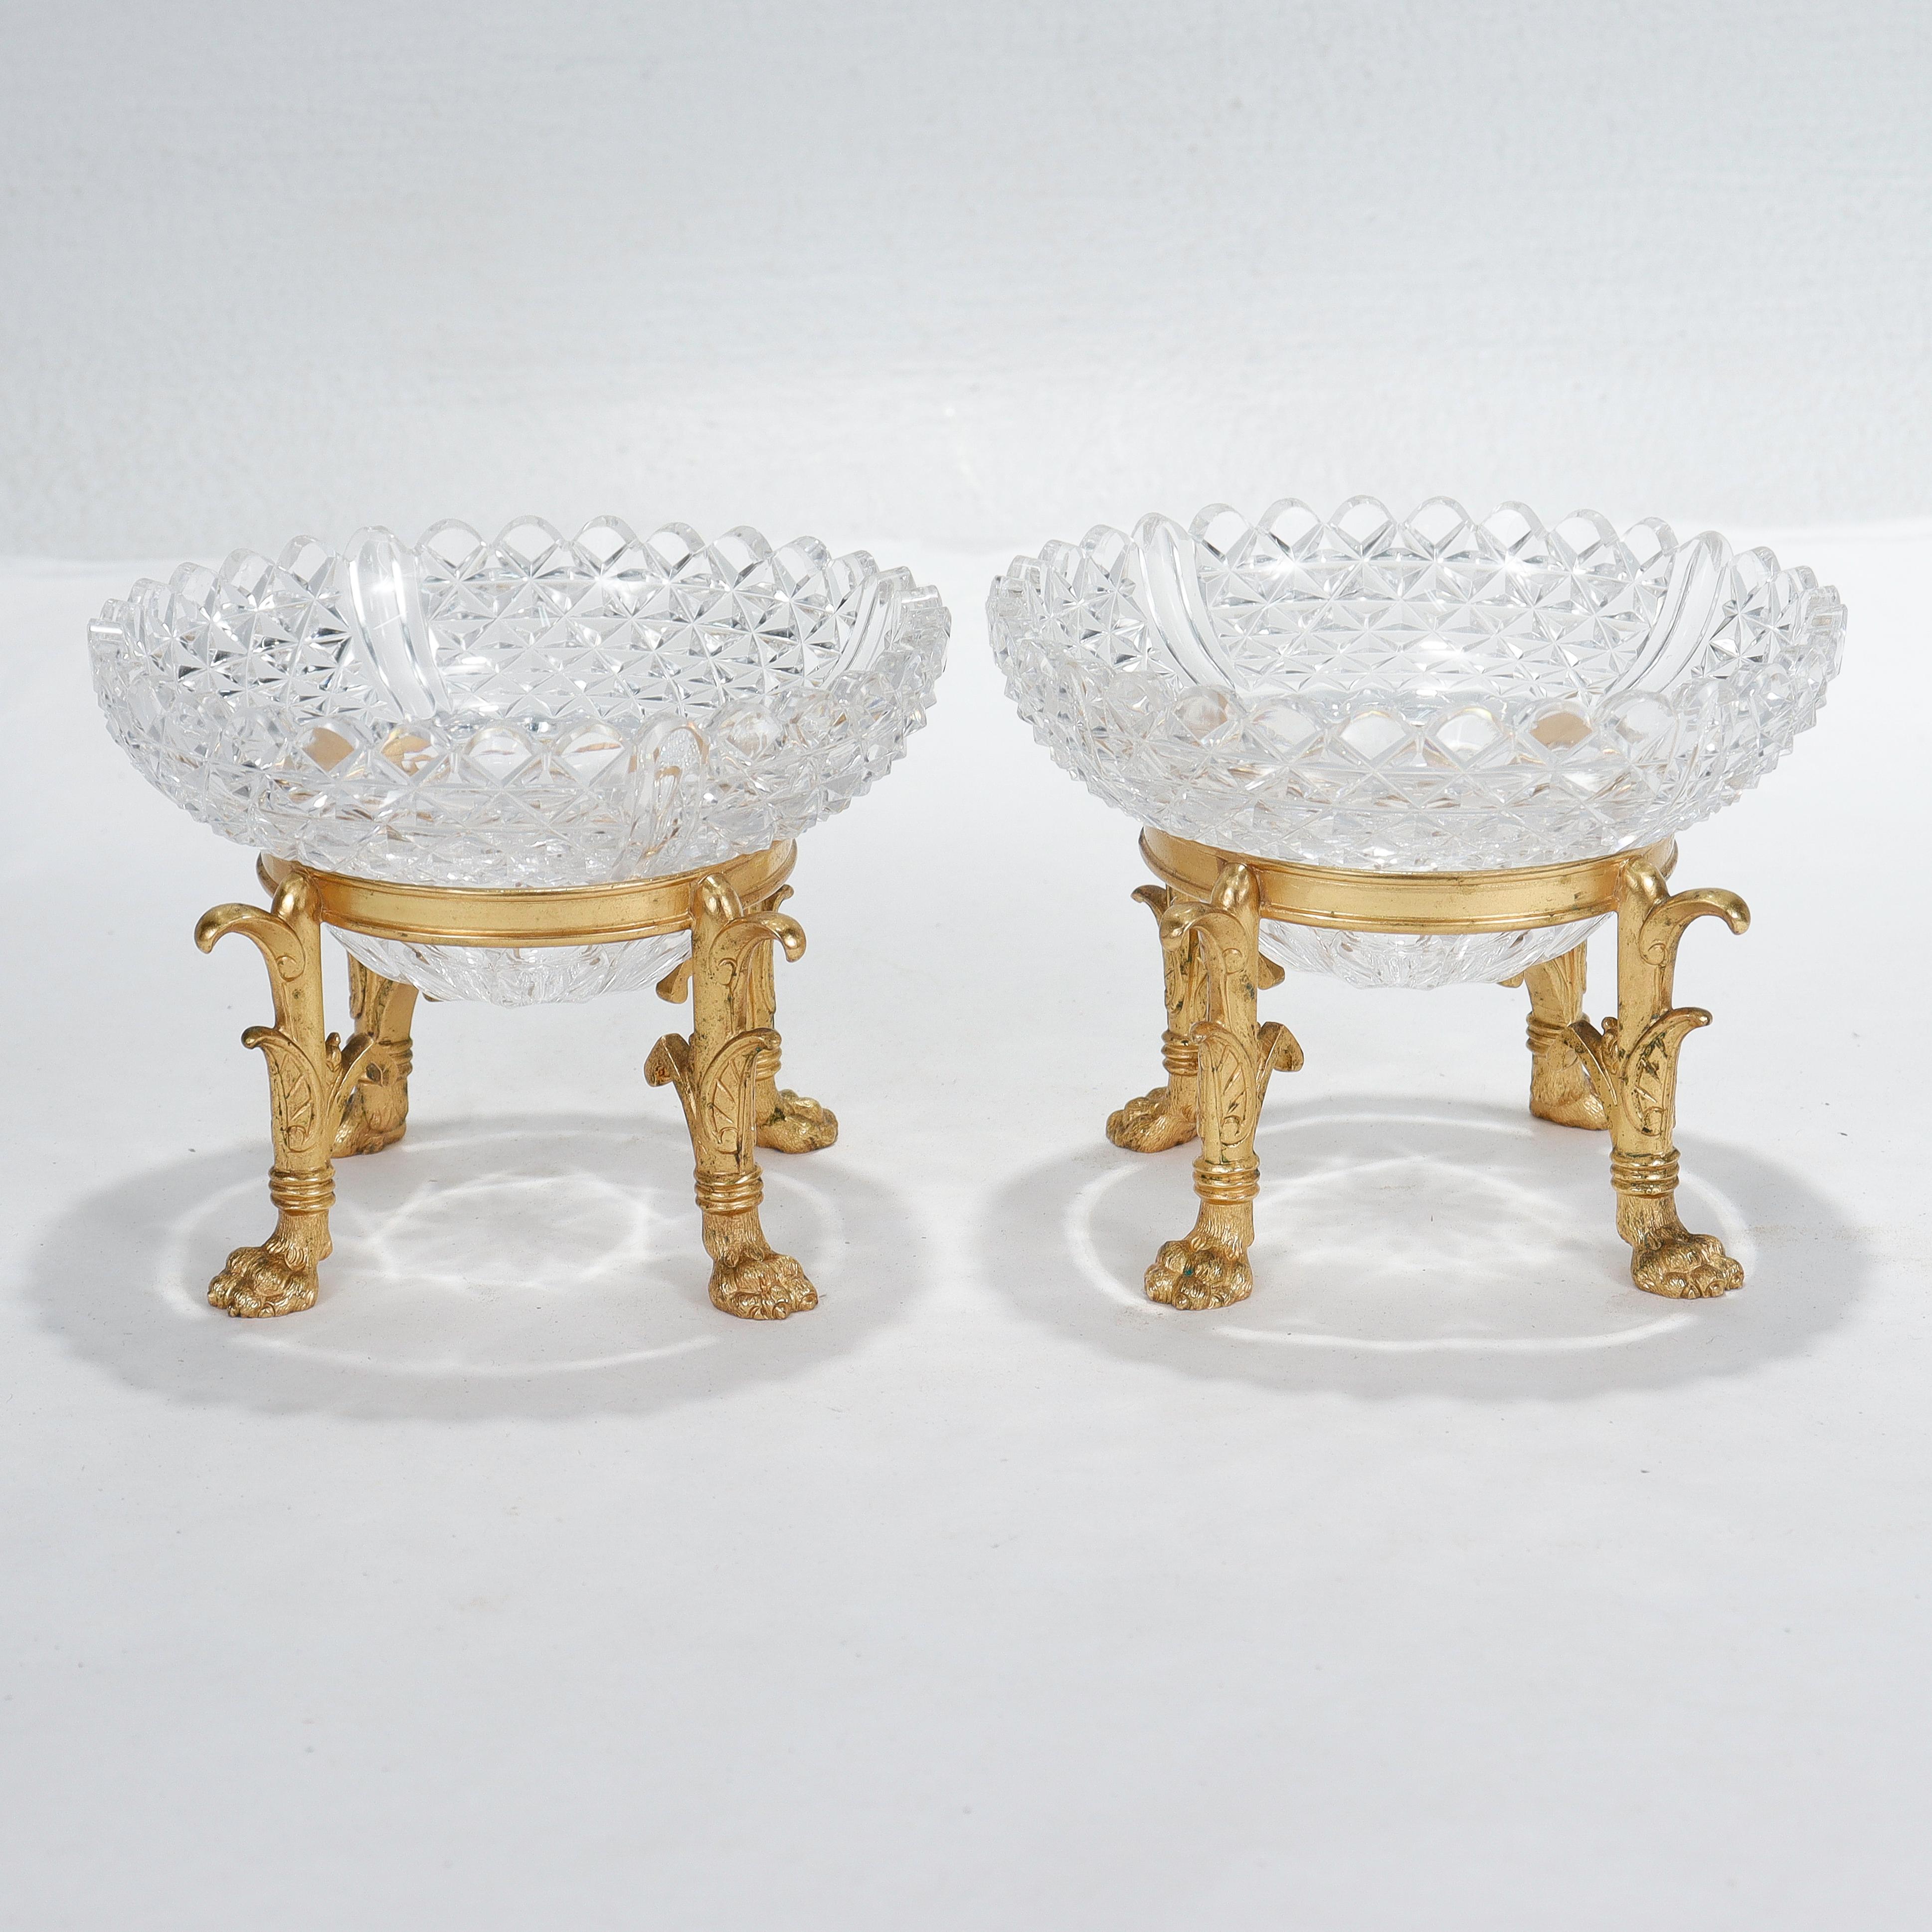 Pair of Gilt Bronze & Cut Glass Footed Bowls Attributed to F. & C. Osler 3